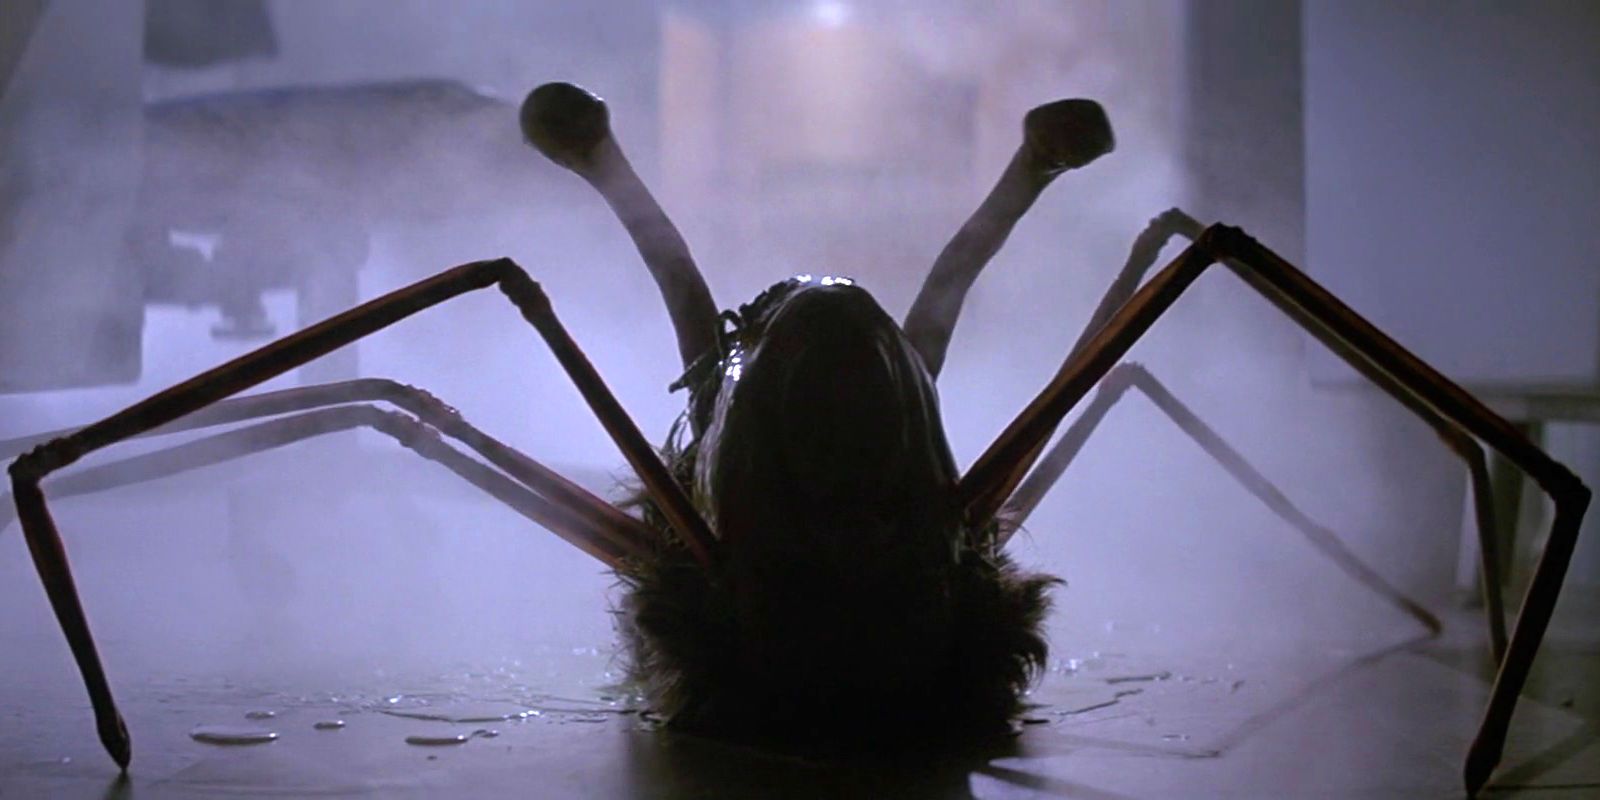 How The Thing Did The SpiderHead (Without Any CGI)